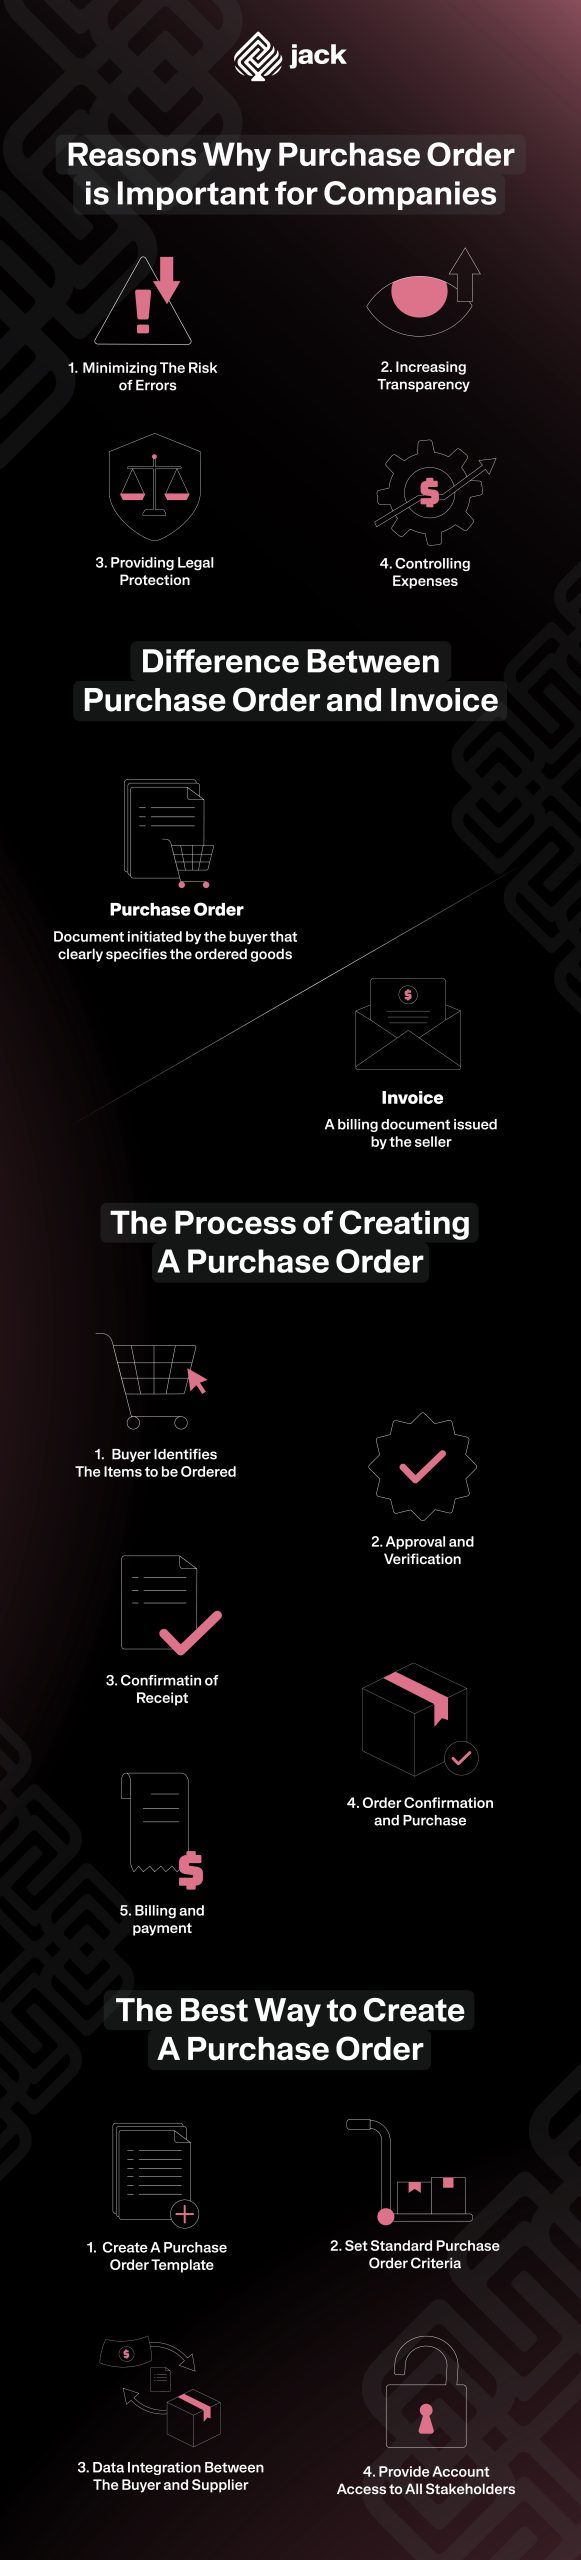 Infographic Automating Purchase Order for Business Efficiency, How to Do It